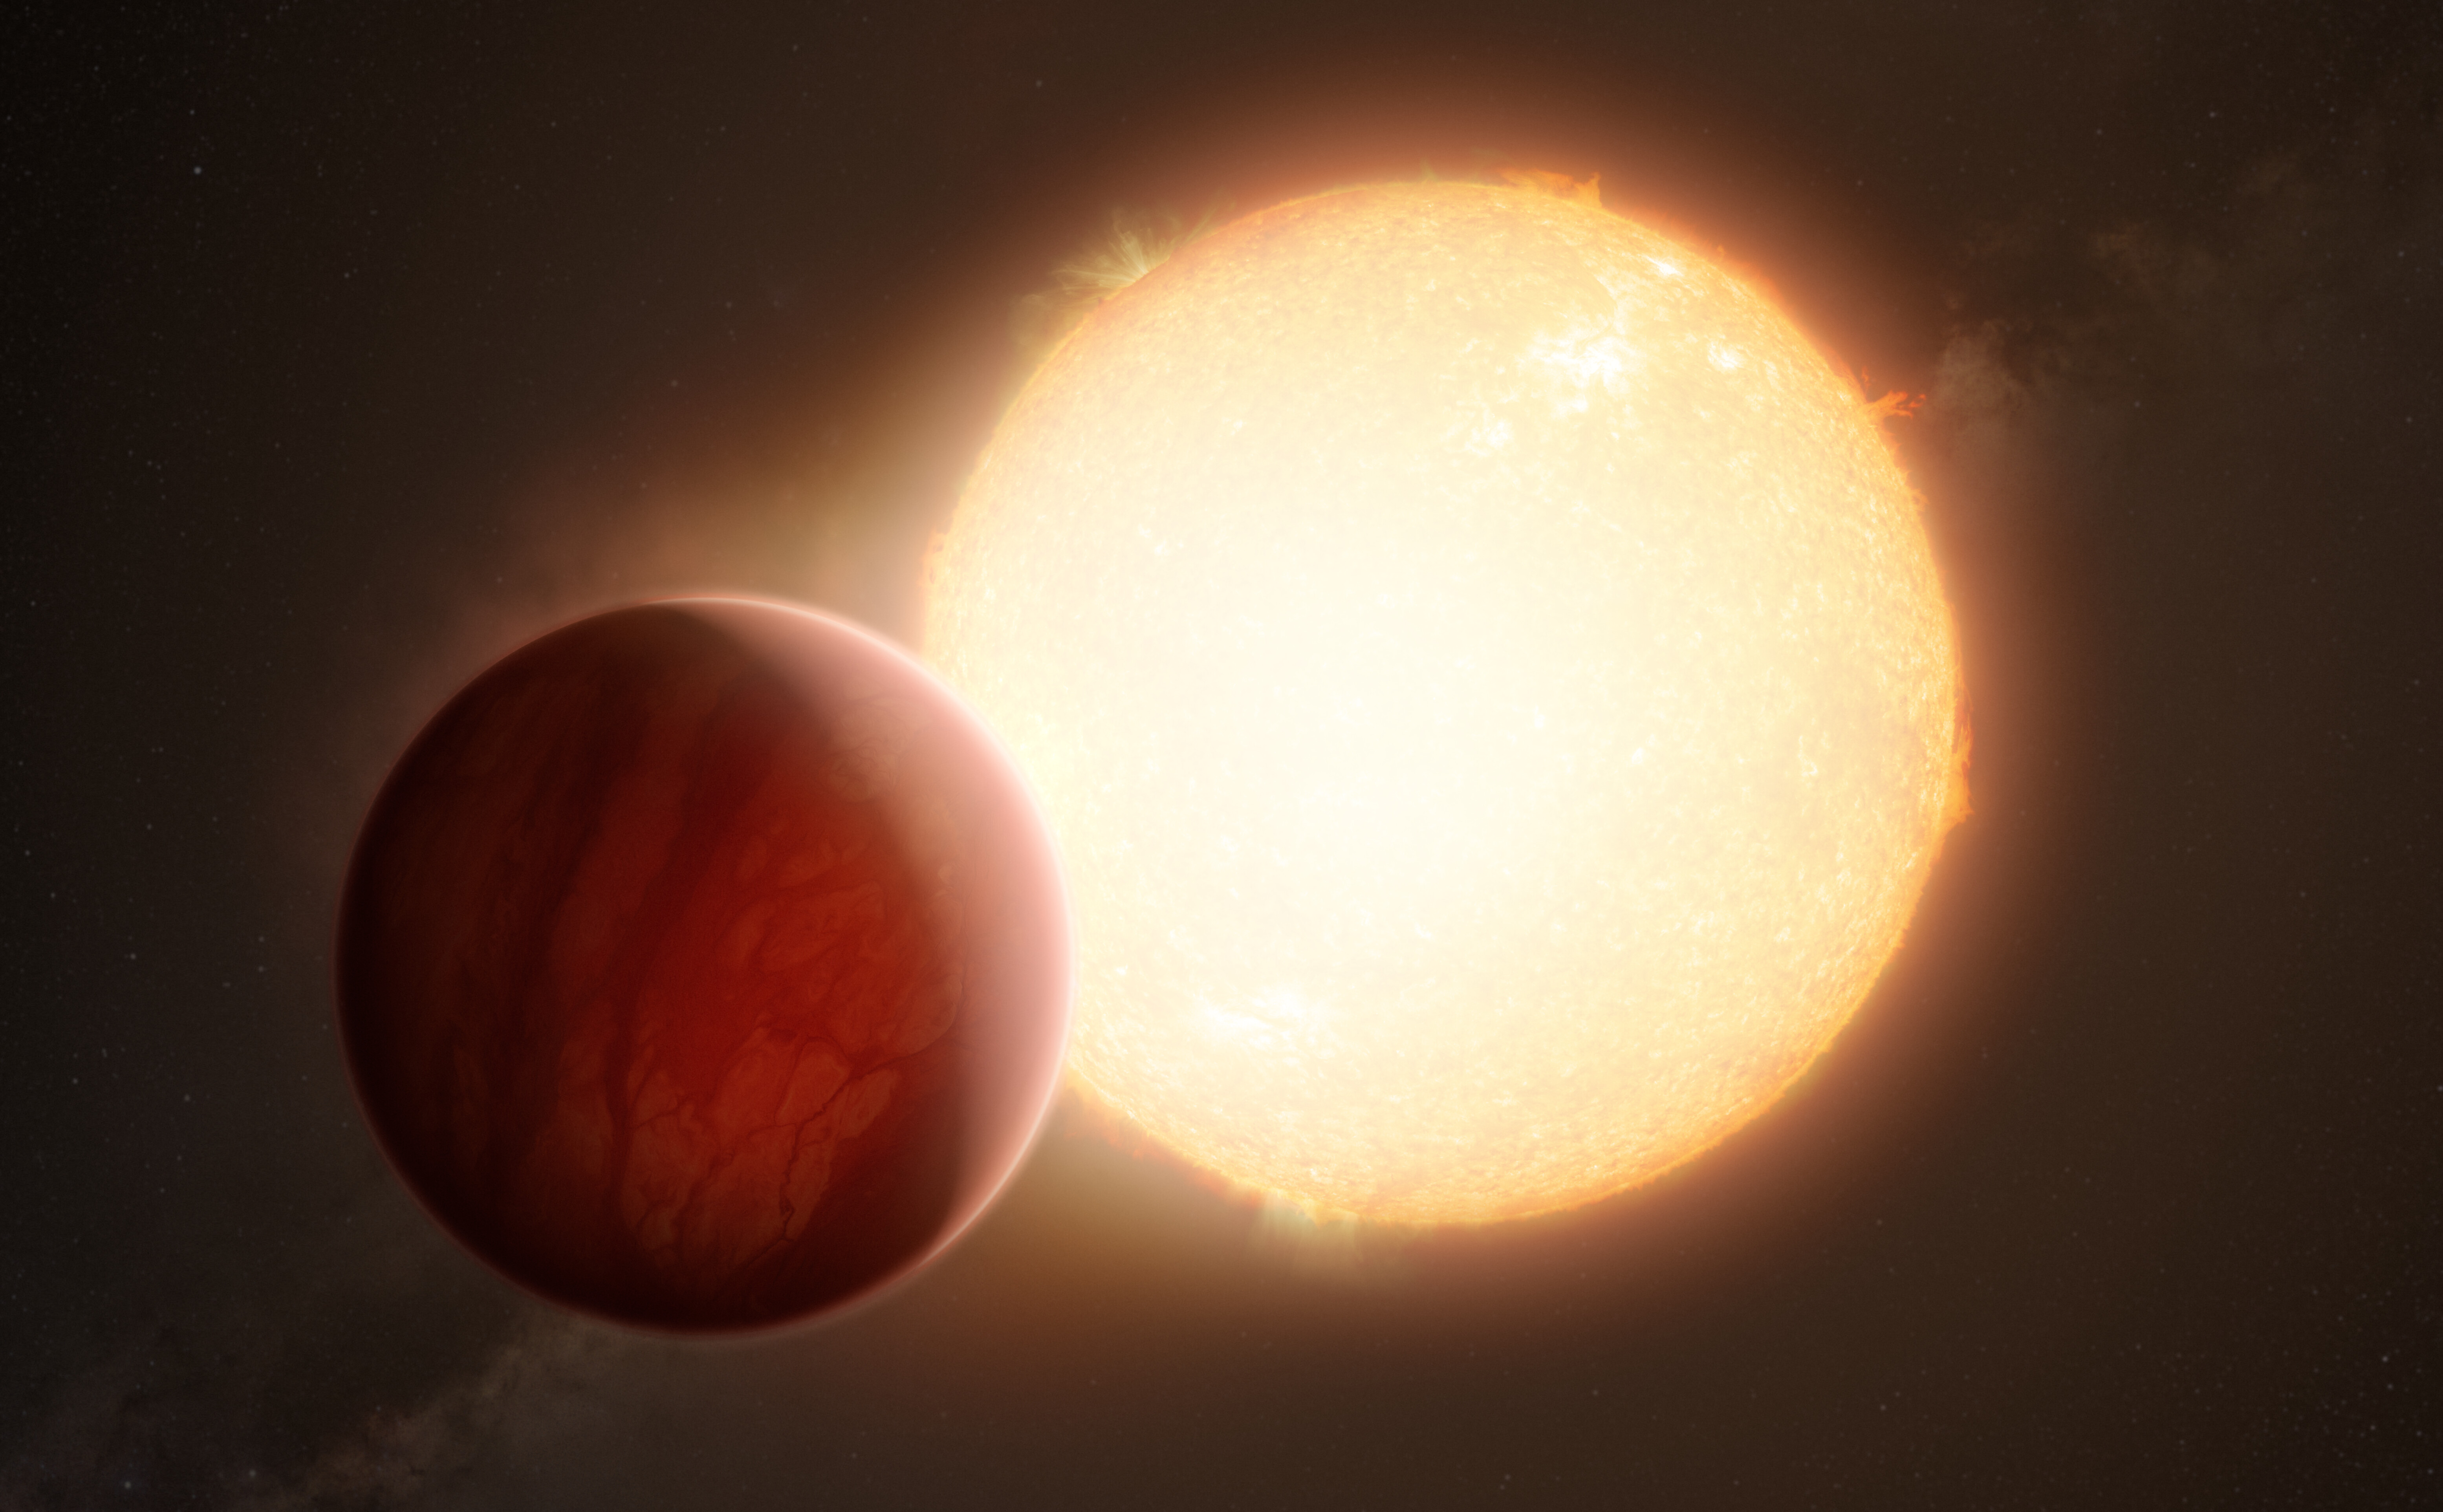 This artist’s impression shows an ultra-hot exoplanet, a planet beyond our Solar System, as it is about to transit in front of its host star. When the light from the star passes through the planet’s atmosphere, it is filtered by the chemical elements and molecules in the gaseous layer. With sensitive instruments, the signatures of those elements and molecules can be observed from Earth. Using the ESPRESSO instrument of ESO’s Very Large Telescope, astronomers have found the heaviest element yet in an exoplanet's atmosphere, barium, in the two ultra-hot Jupiters WASP-76 b and WASP-121 b.